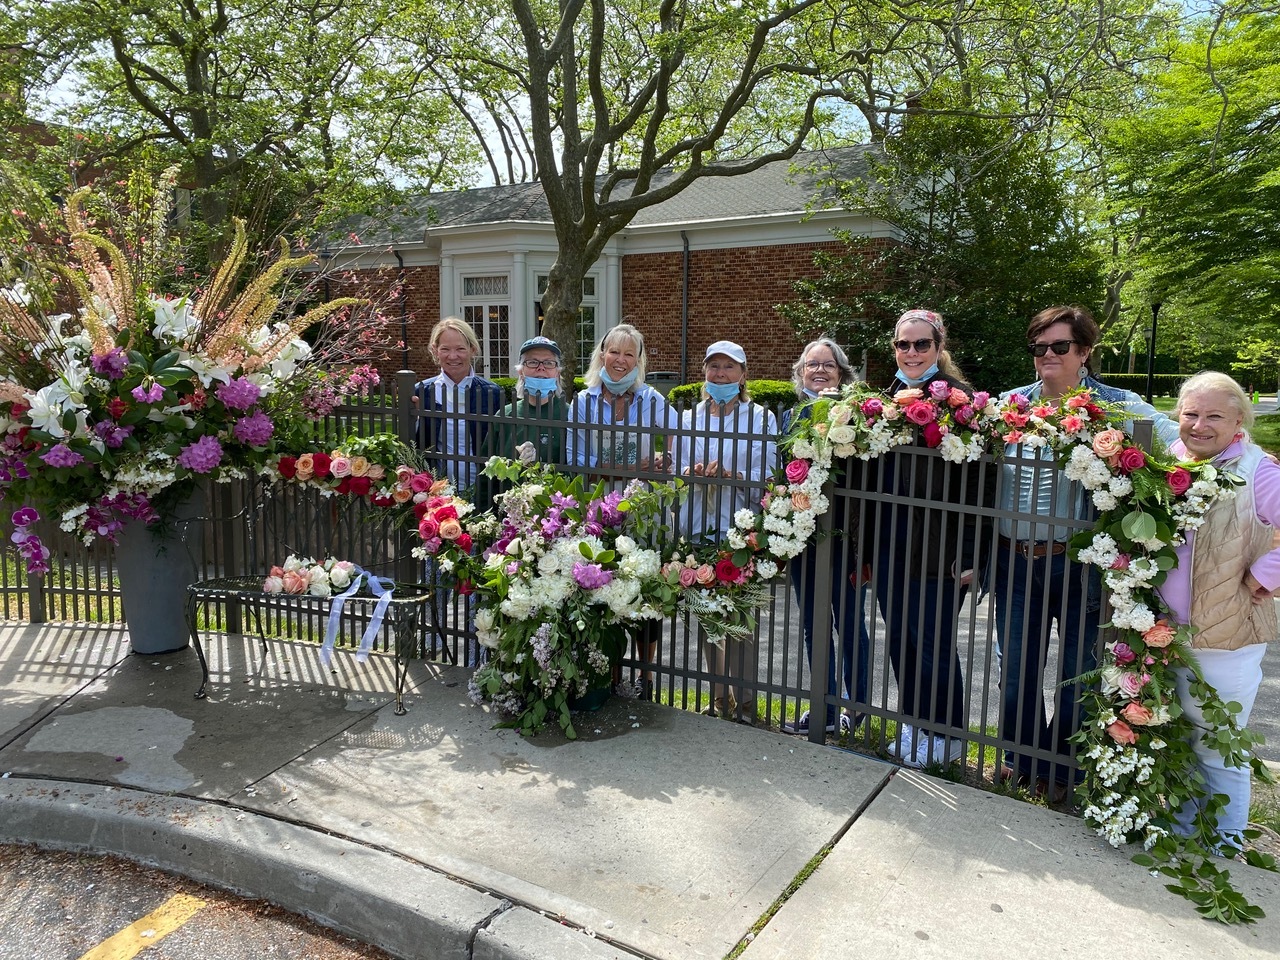 Members of The Southampton Garden, left to right: Deb dela Gueronneire, Lydia Wallis, Cindy Willis, Christl Meszkat, Janis Murphy, Barbara Glatt, Erin Meaney, Elizabeth Robertson, created a surprise ‘Flower Flash’ on the grounds of Stony Brook Southampton Hospital earlier this month to thank staff and employees for all they do for our community. Using flowers from local flower shop Topiare and member’s own gardens, the display was conceived and executed under the direction of club president Barbara Glatt and members Erin Hattrick Meaney and Cindy Willis.